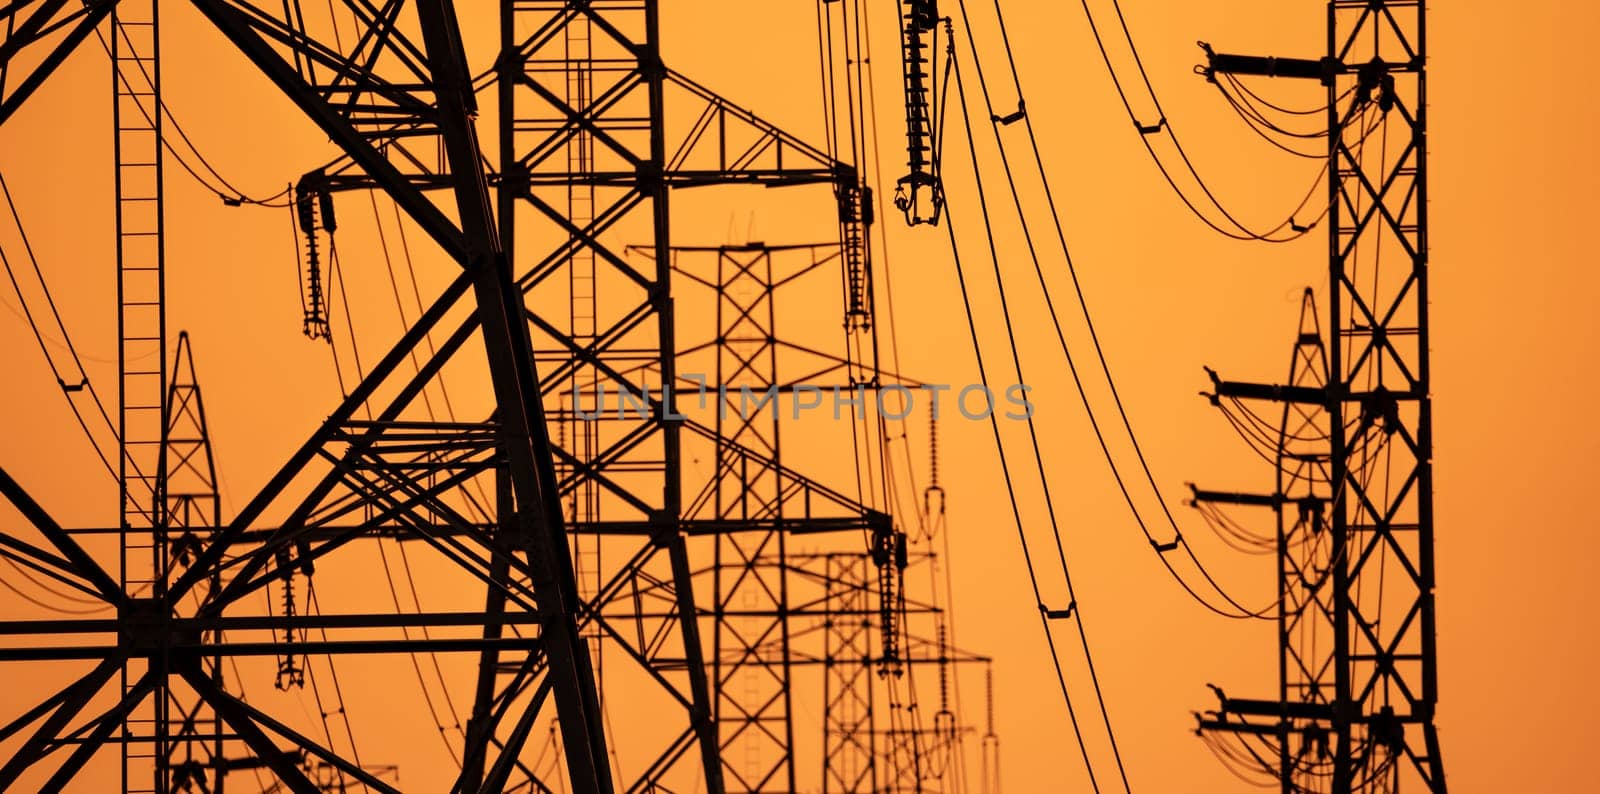 High voltage electric transmission tower. High voltage power lines on electric pylon against a sunset sky. Electrical infrastructure. Energy crisis. Electric power distribution. Energy distribution. by Fahroni